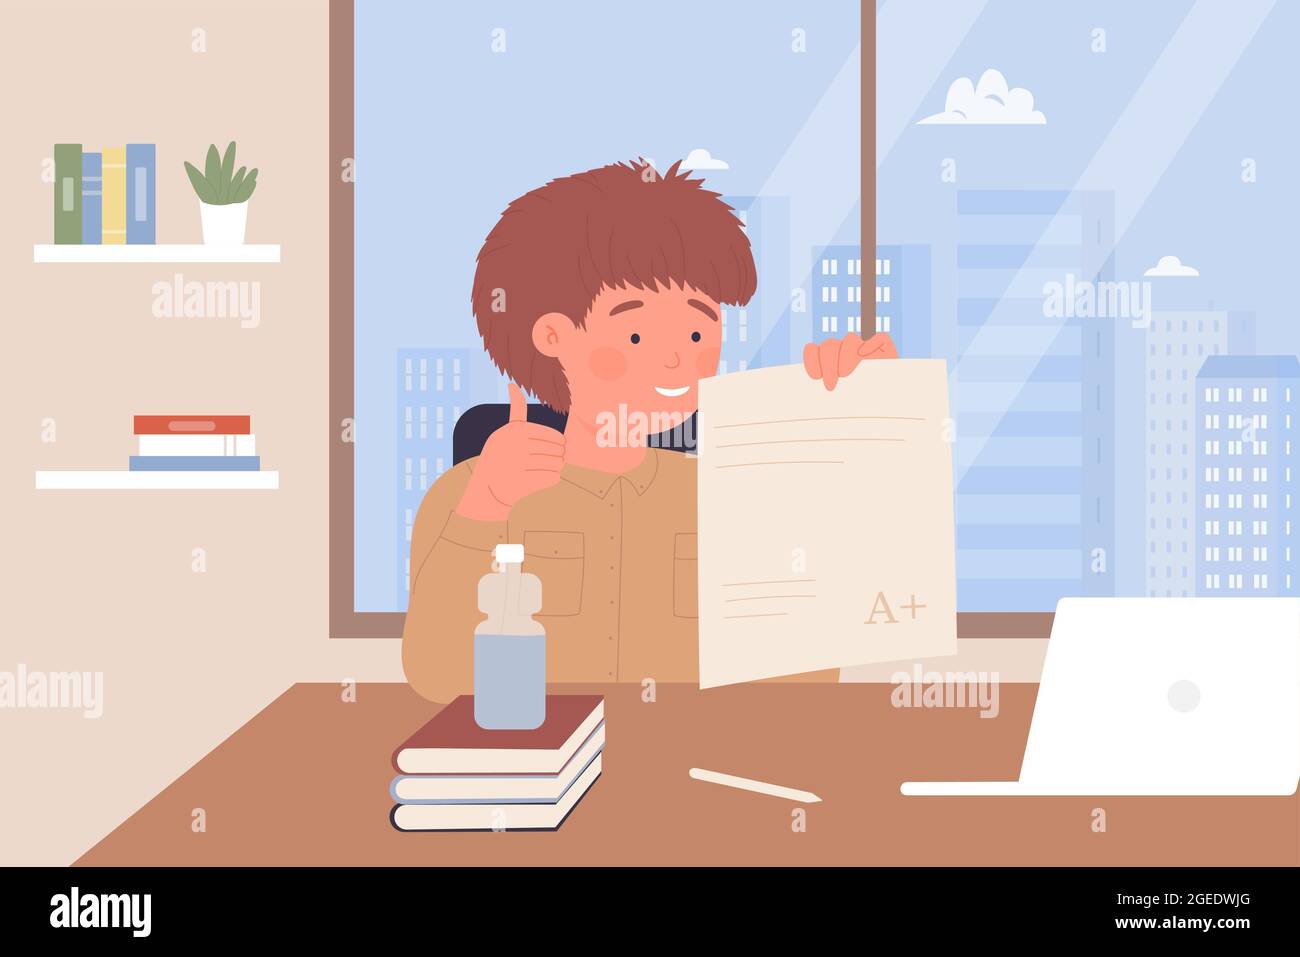 Children students study at home vector illustration. Cartoon cute little  boy child character studying, holding paper with homework, sitting at table  with books and laptop in home interior background Stock Vector Image